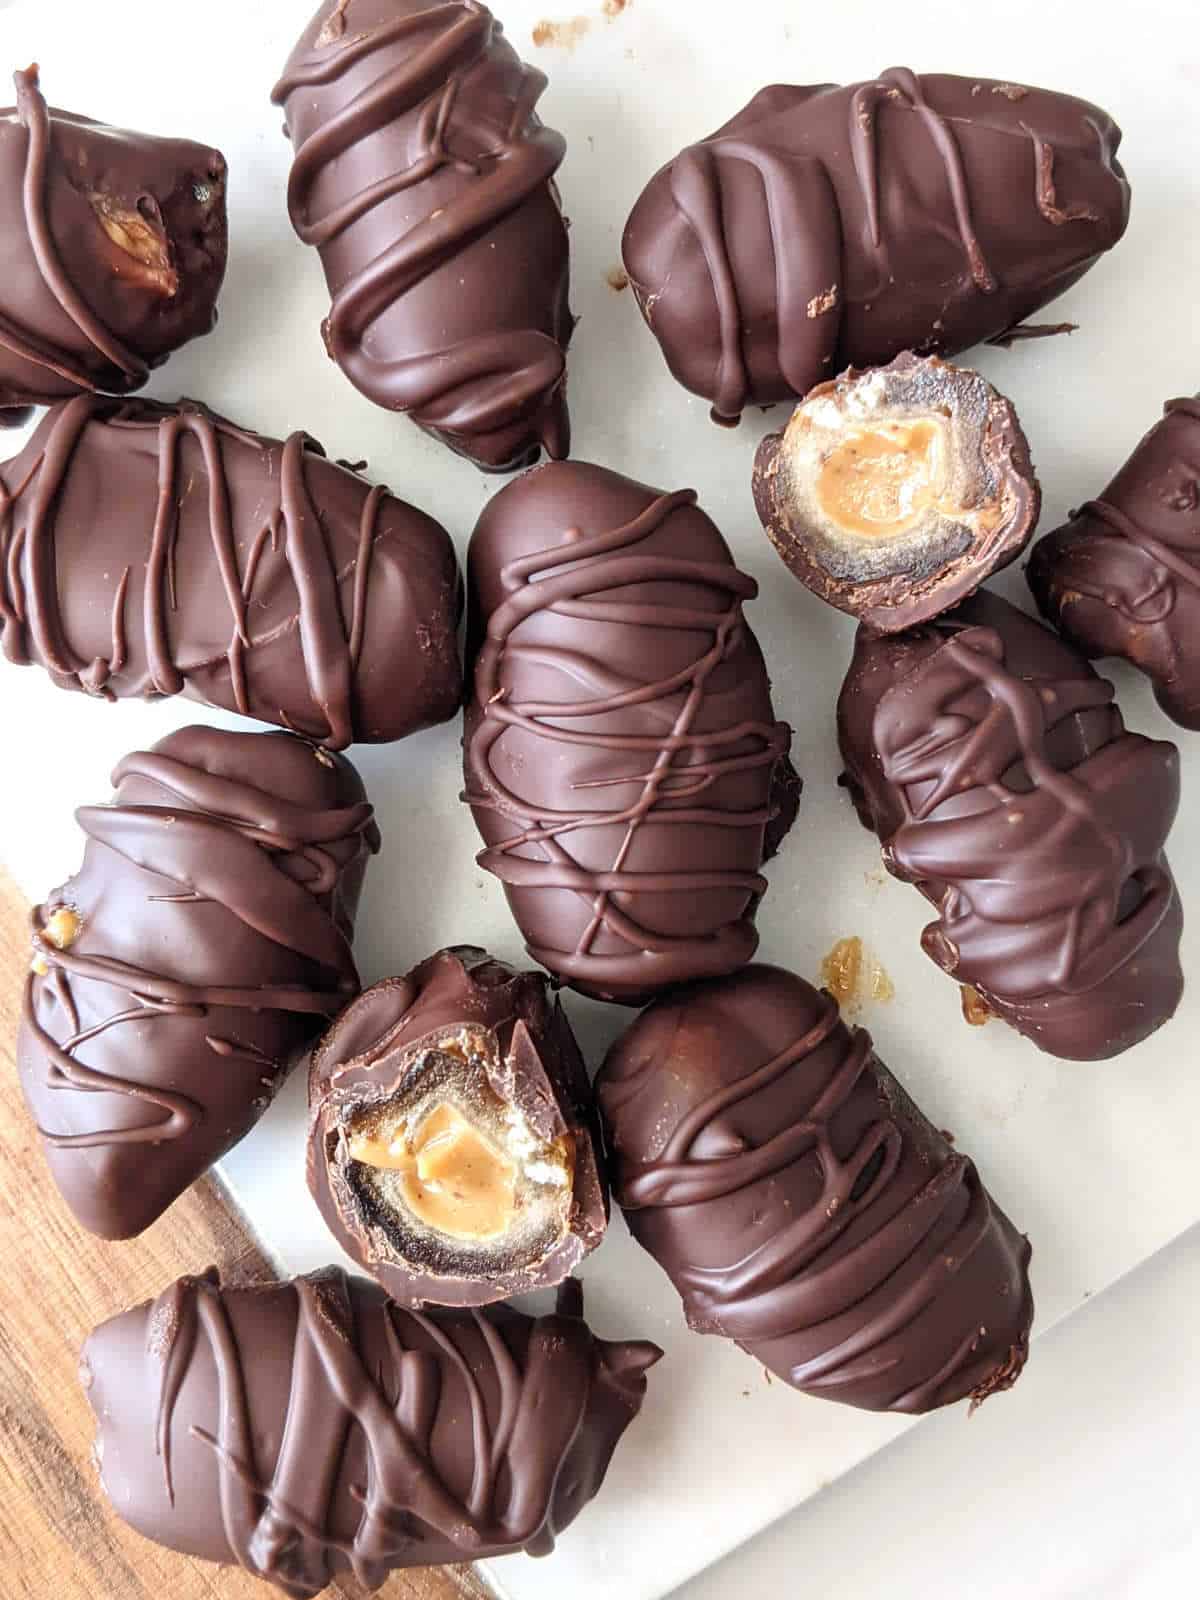 Dates stuffed with peanut butter and covered with chocolate sitting on a serving board with a couple dates cut in half.